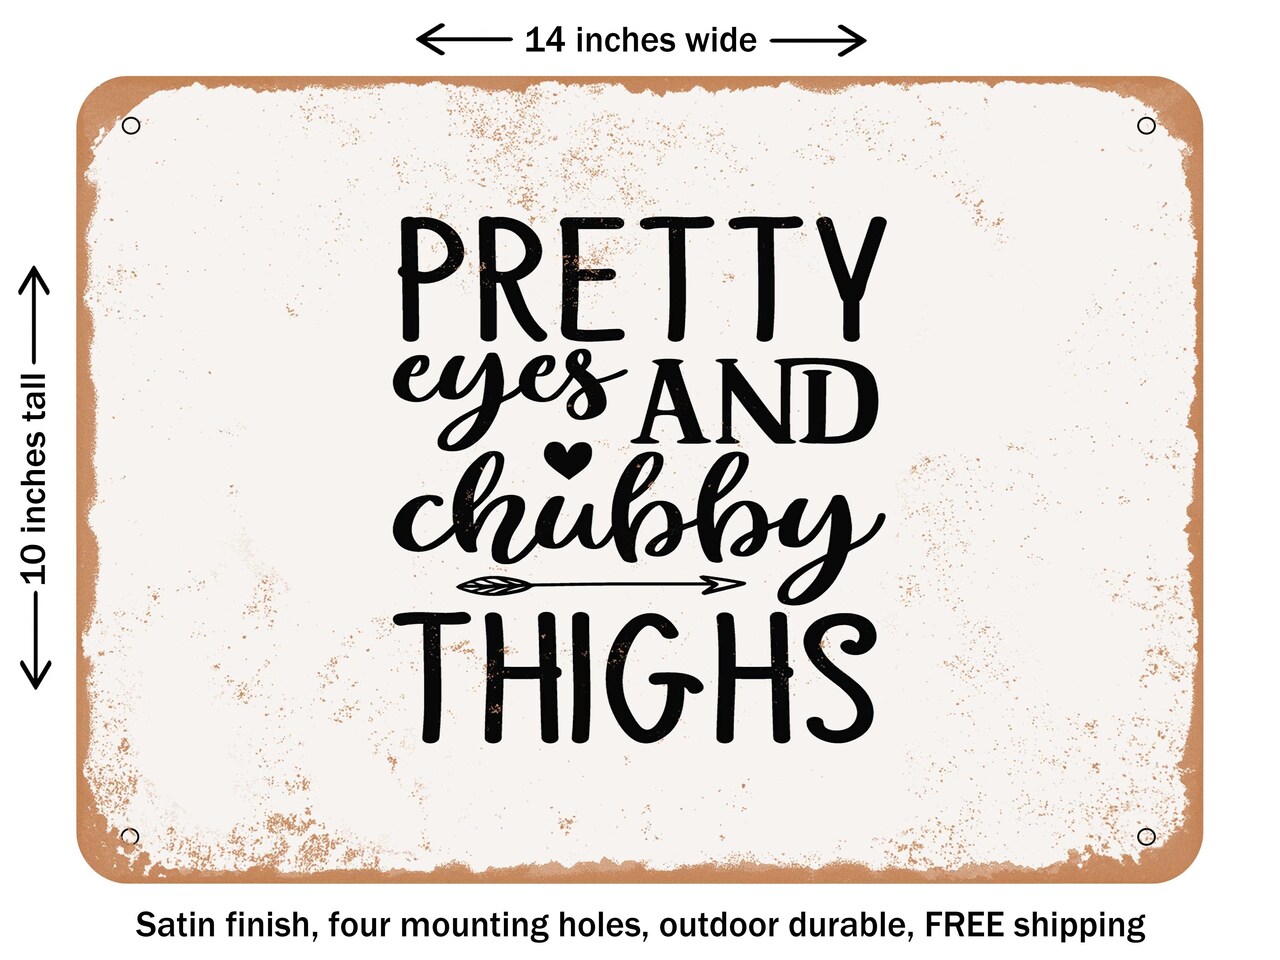 DECORATIVE METAL SIGN - Pretty Eyes and Chubby Thighs - 4 - Vintage Rusty Look